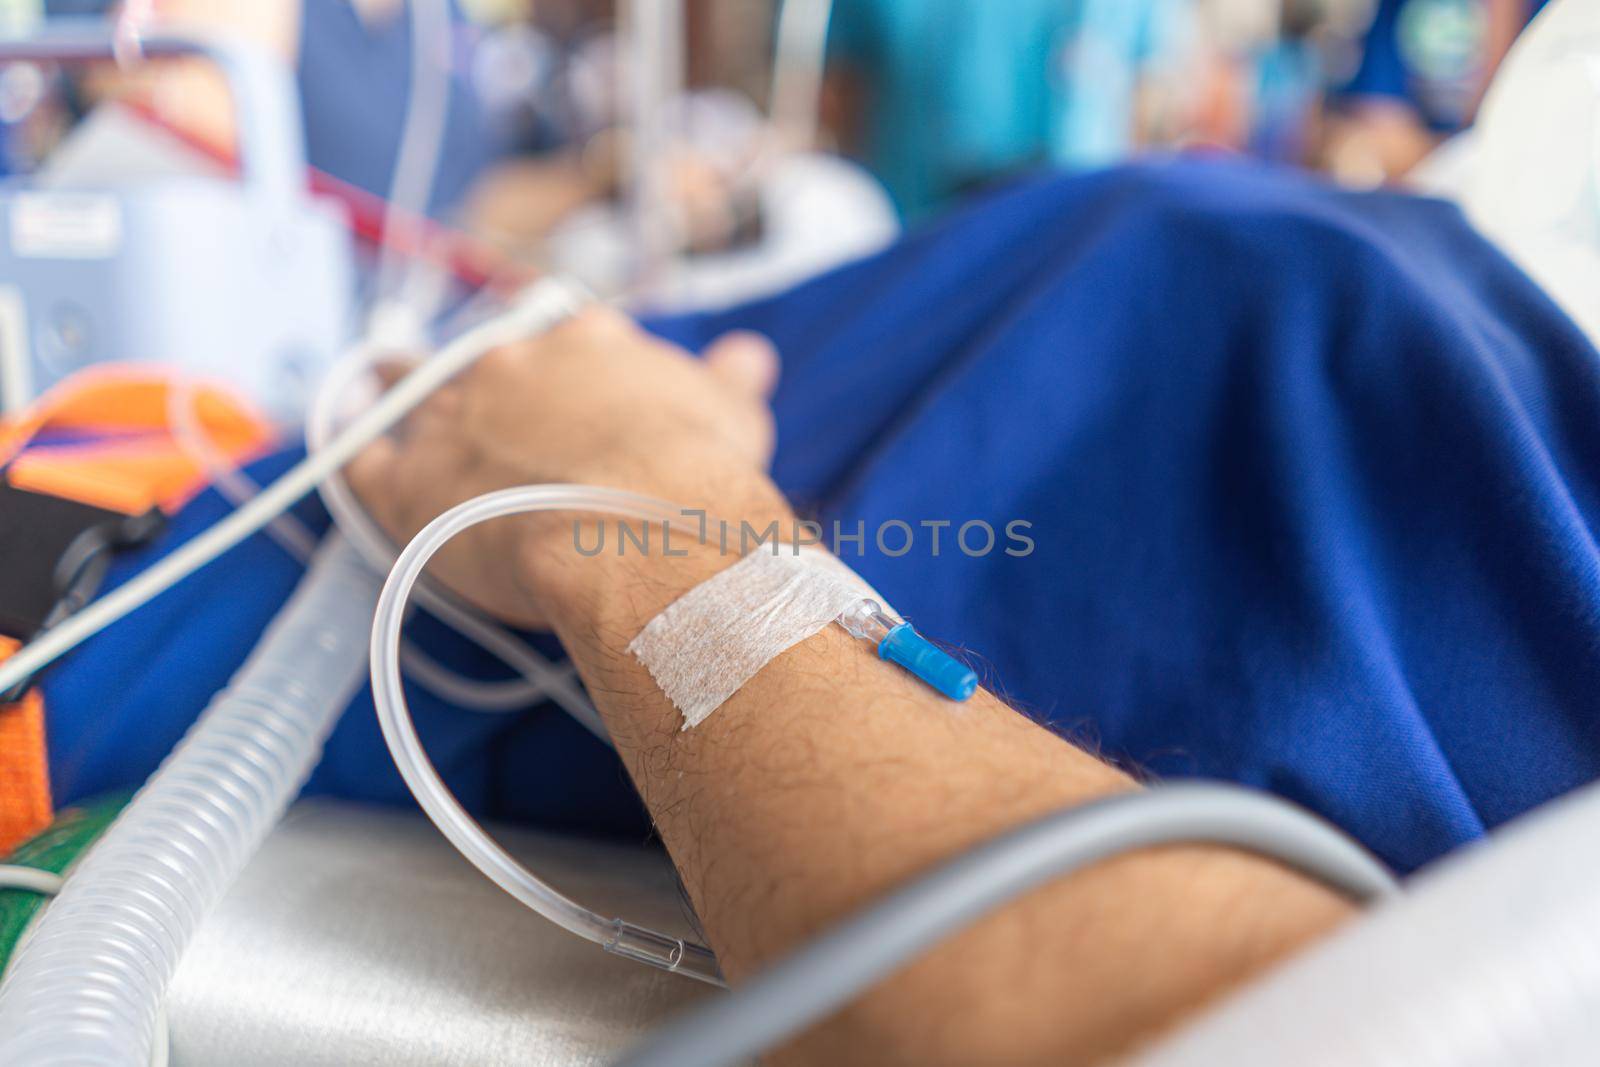 A close-up picture of a patient hand taking saline solution